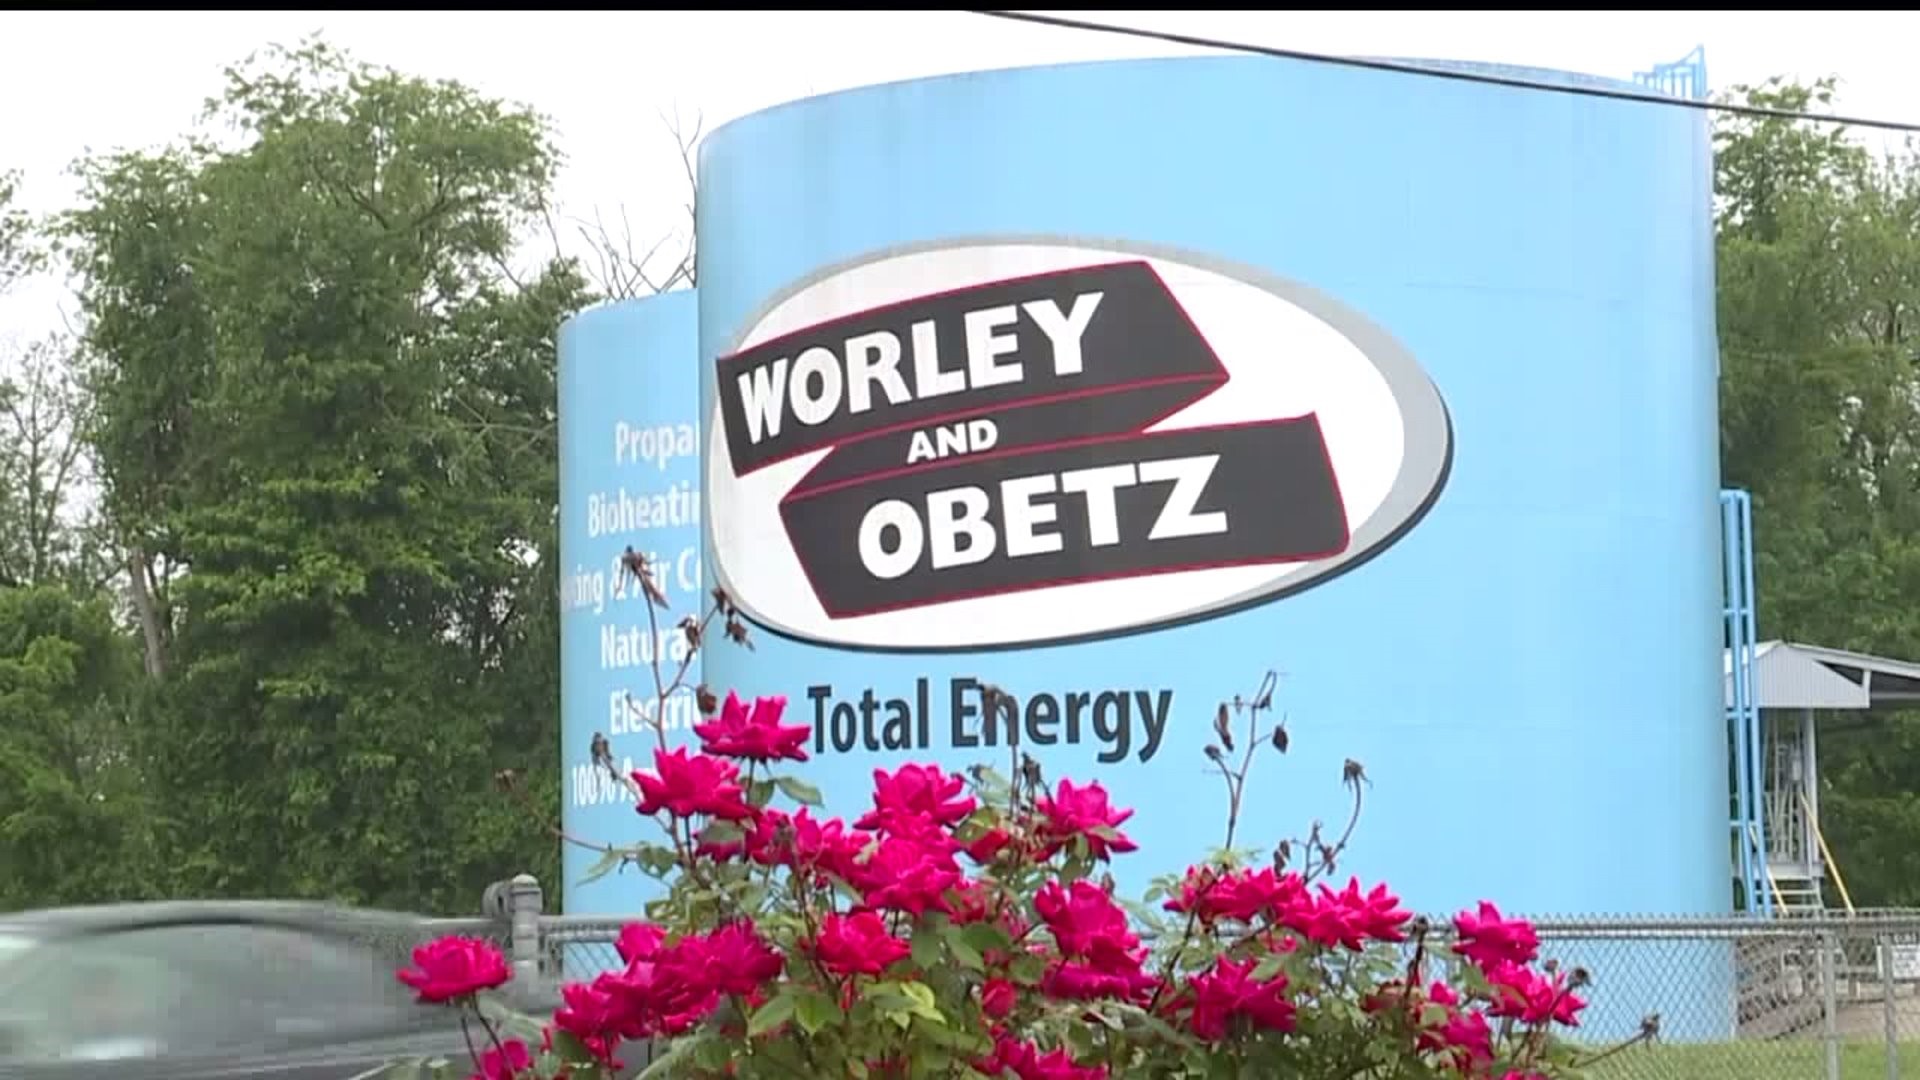 Fourth bank in PA impacted by Worley and Obetz